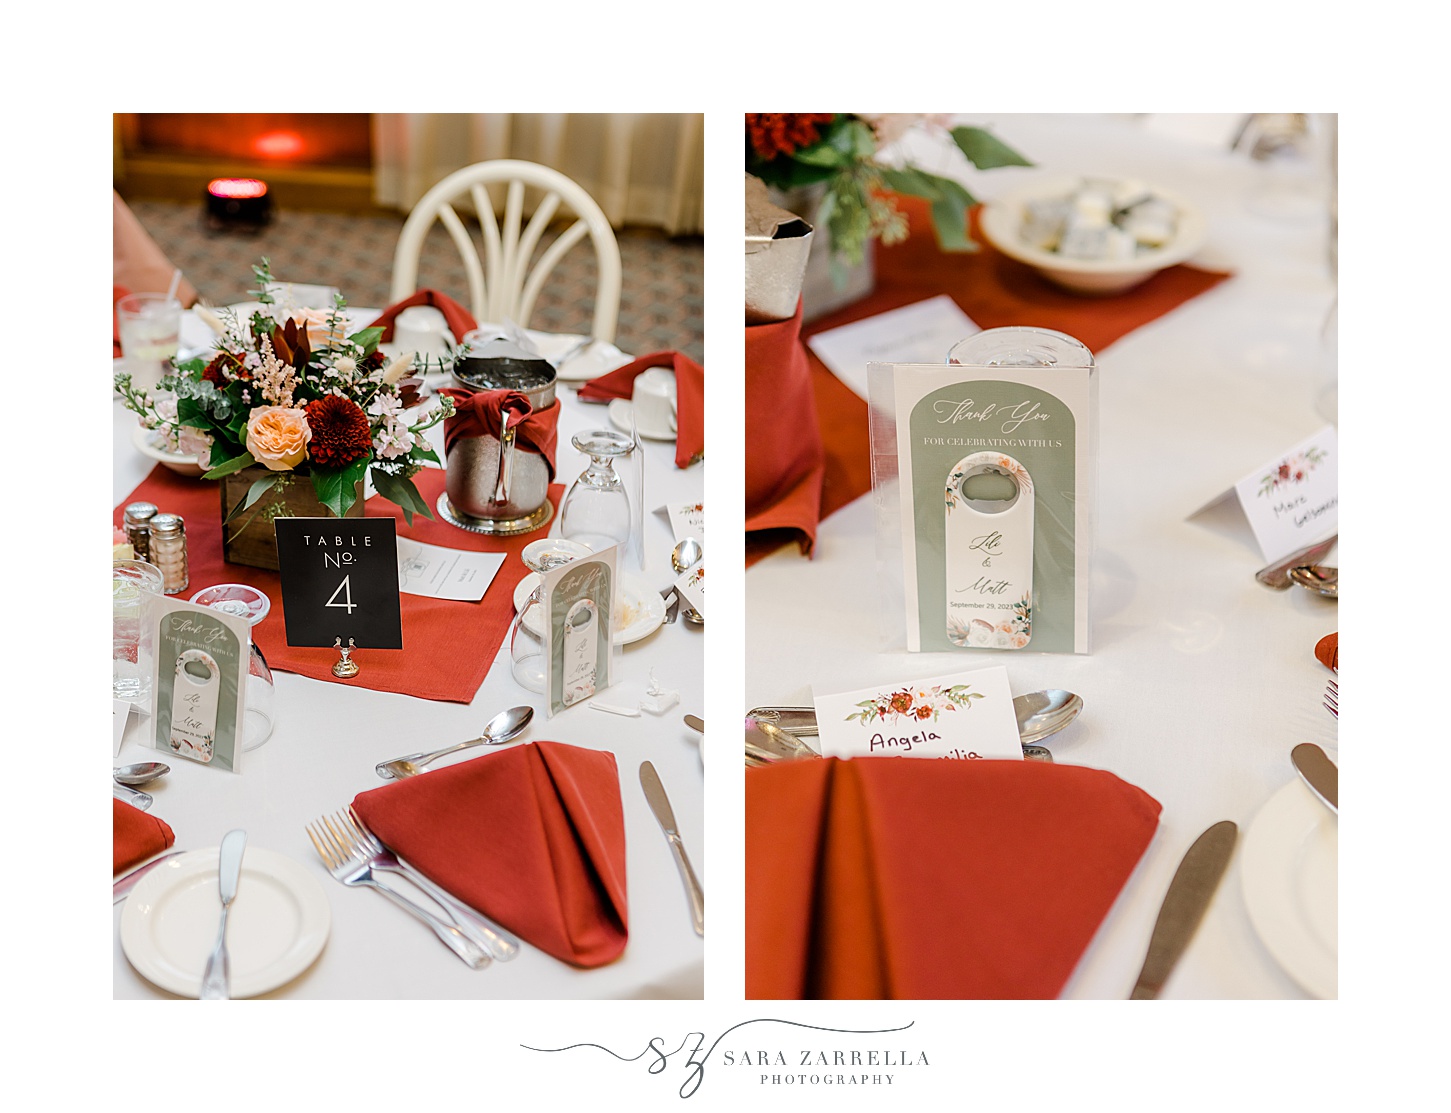 place setting for reception at Jacky's Galaxie with red napkins